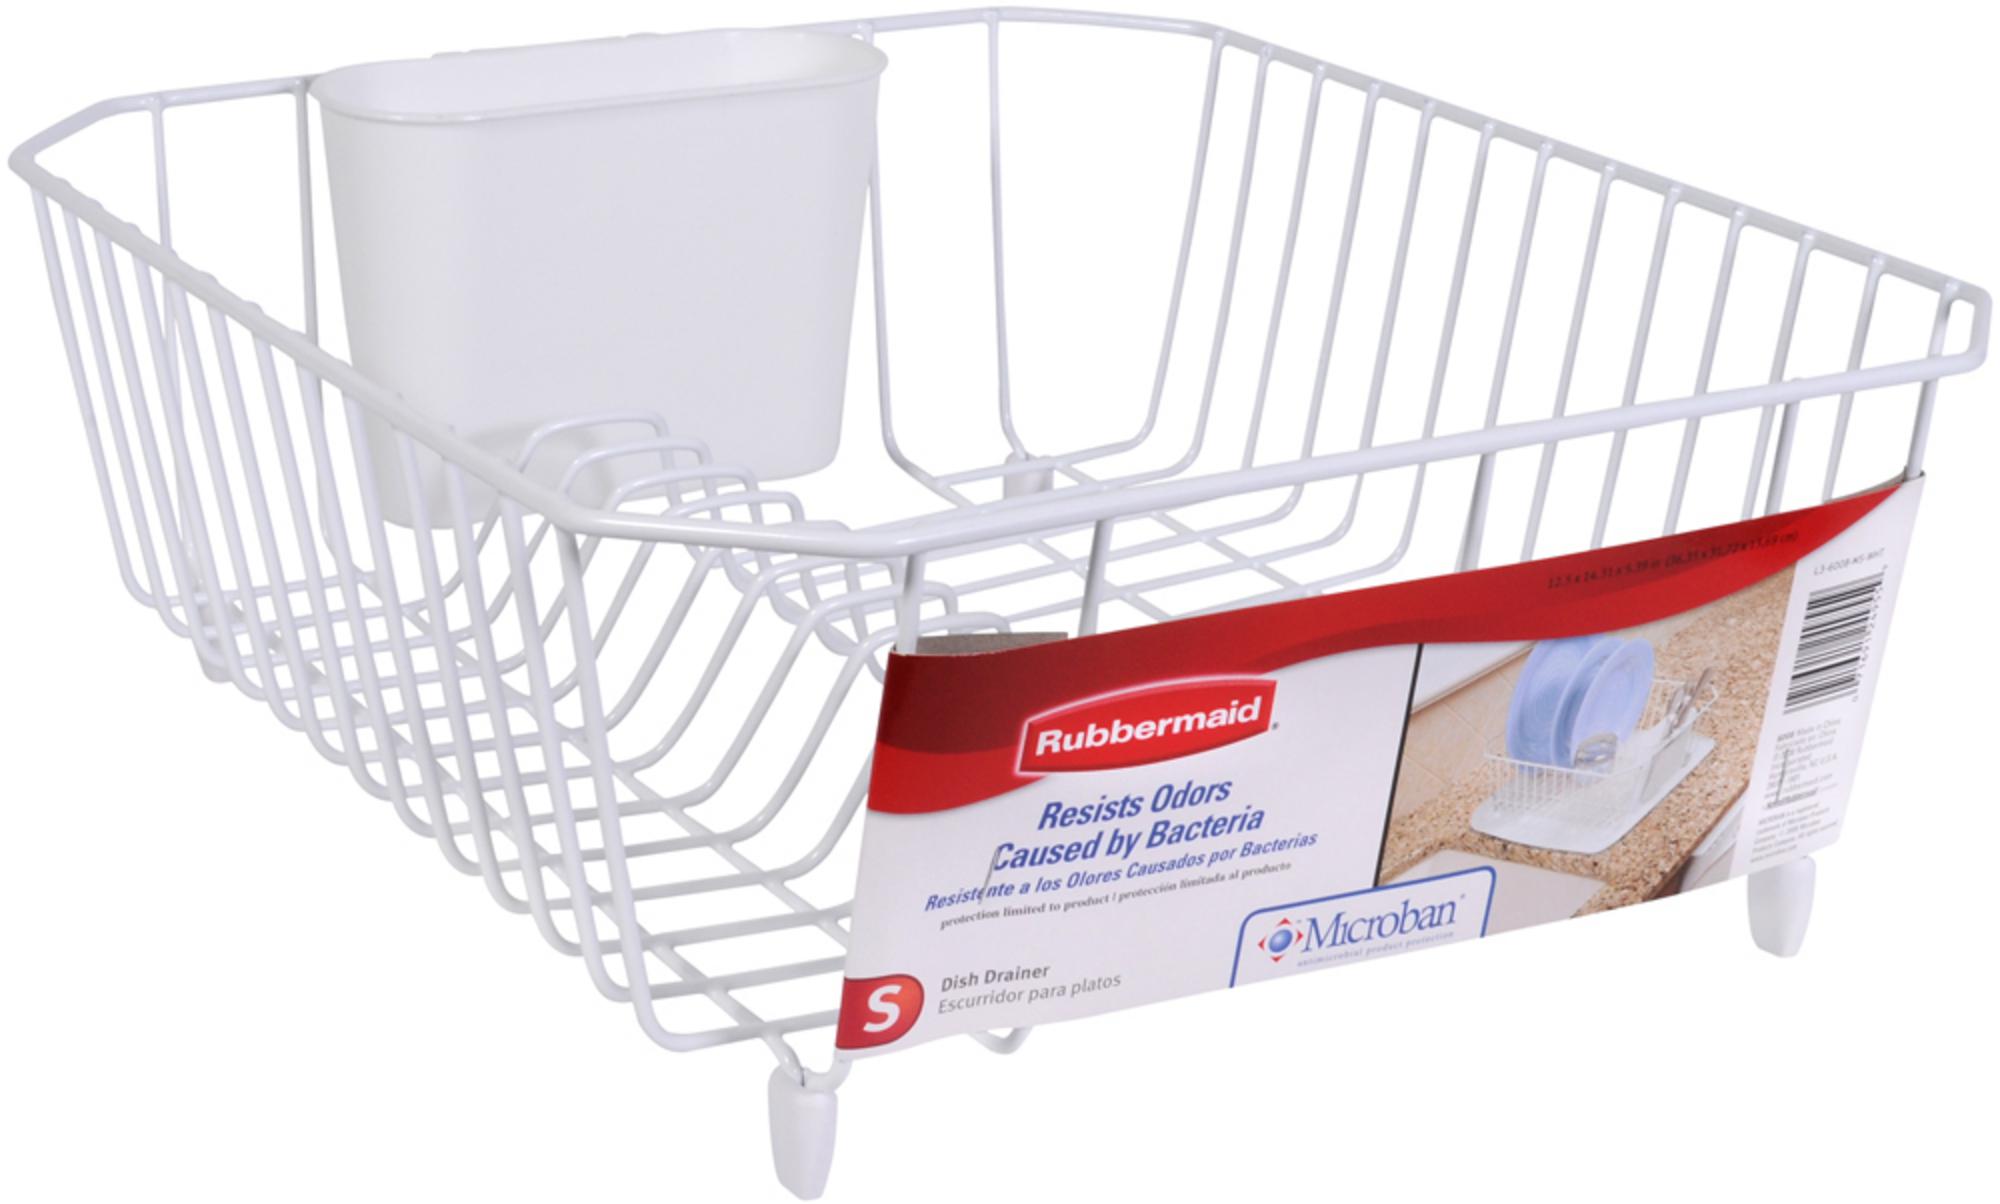 Rubbermaid 5.3 In. H X 12.4 In. W X 14.3 In. L Steel Dish Drainer White - image 2 of 2